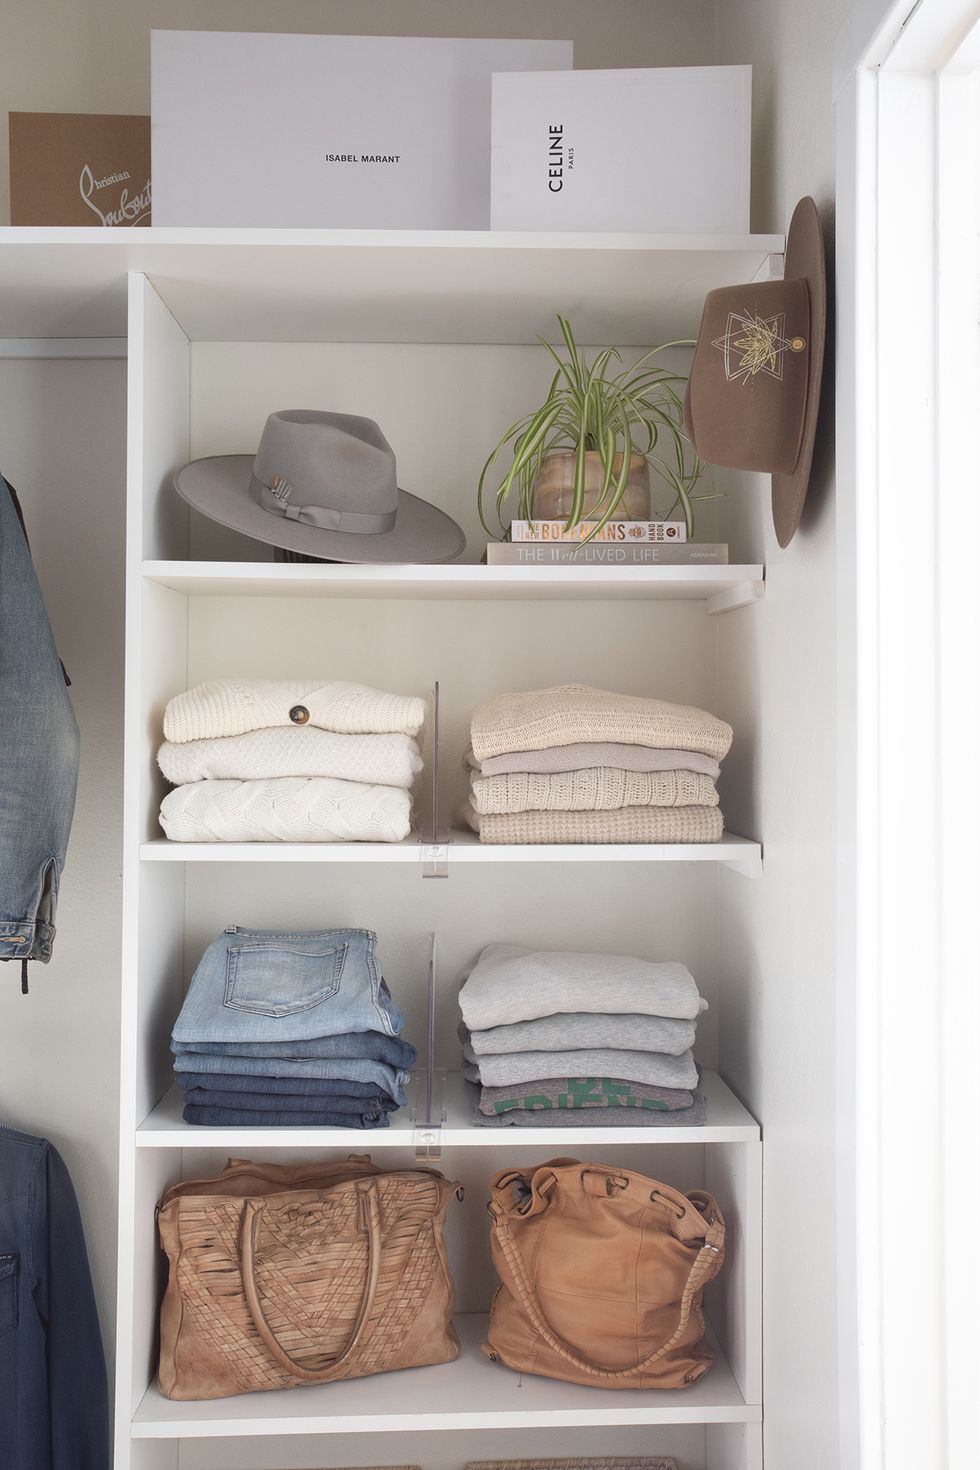 12 No-Closet Clothes Storage Ideas, Room Makeovers to Suit Your Life